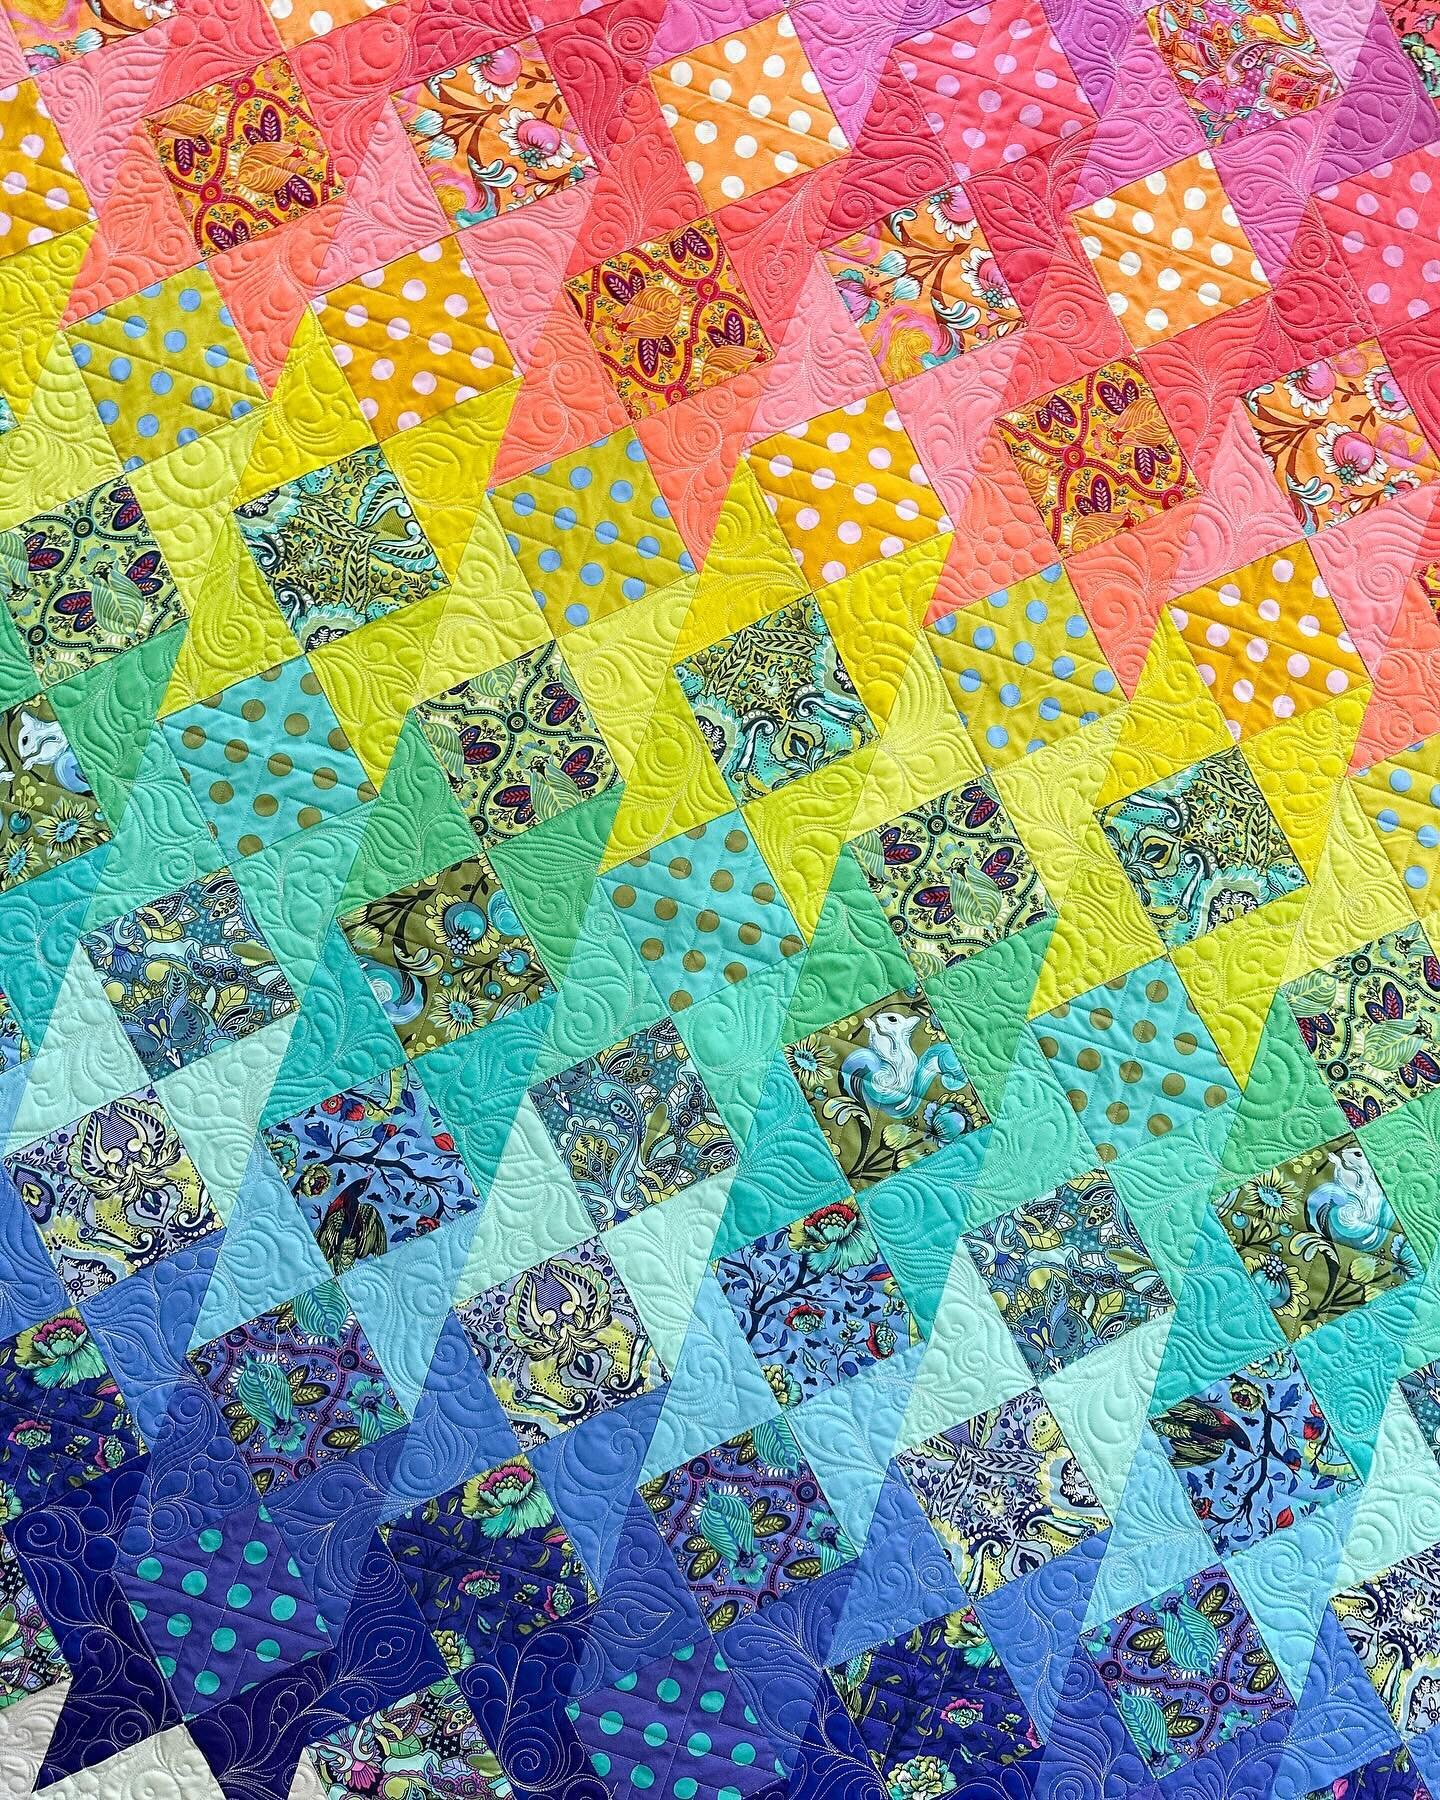 Maria&rsquo;s amazing Into The Deep quilt is done!!! I just added it to my blog, too.  Check there for more details. 

The pattern is an exclusive pattern by @tulapink on a cruise from back in 2018. 

I had the idea to do #graffitiquilting between th